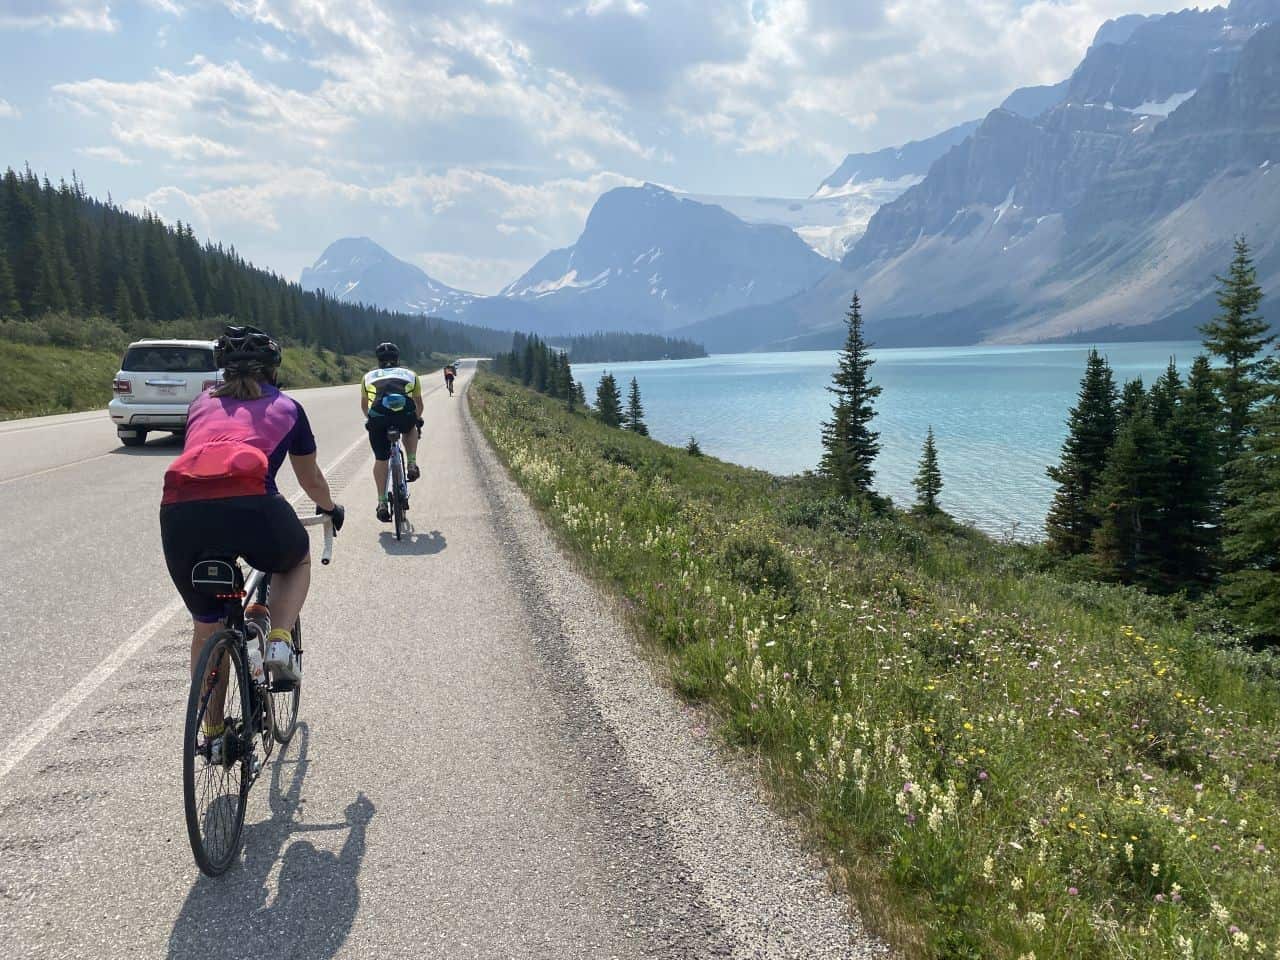 Cycling on the Icefields Parkway in Banff National Park, Alberta, Canada past Bow Lake's turquoise water is a stunning location